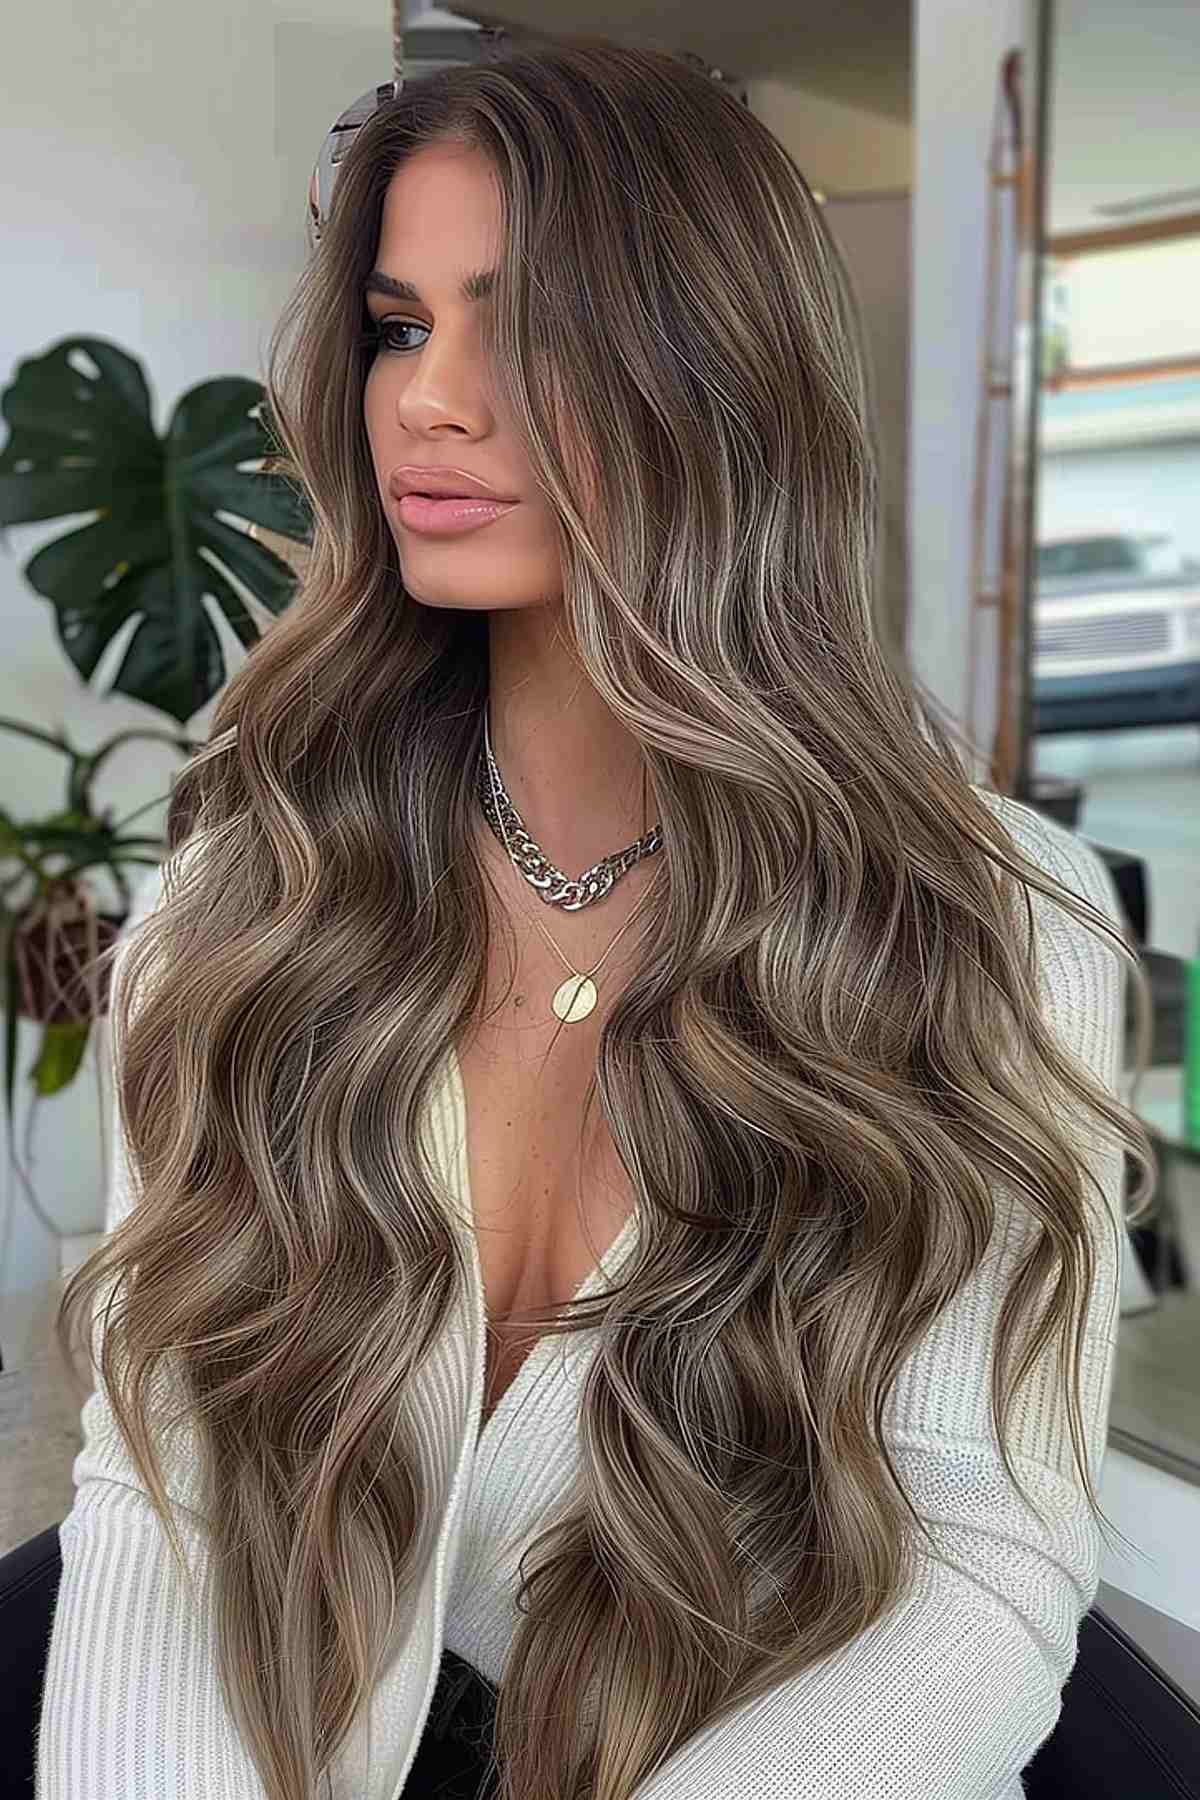 Long, voluminous mushroom brown hair styled in soft, cascading waves, adding depth and elegance to the flowing locks.